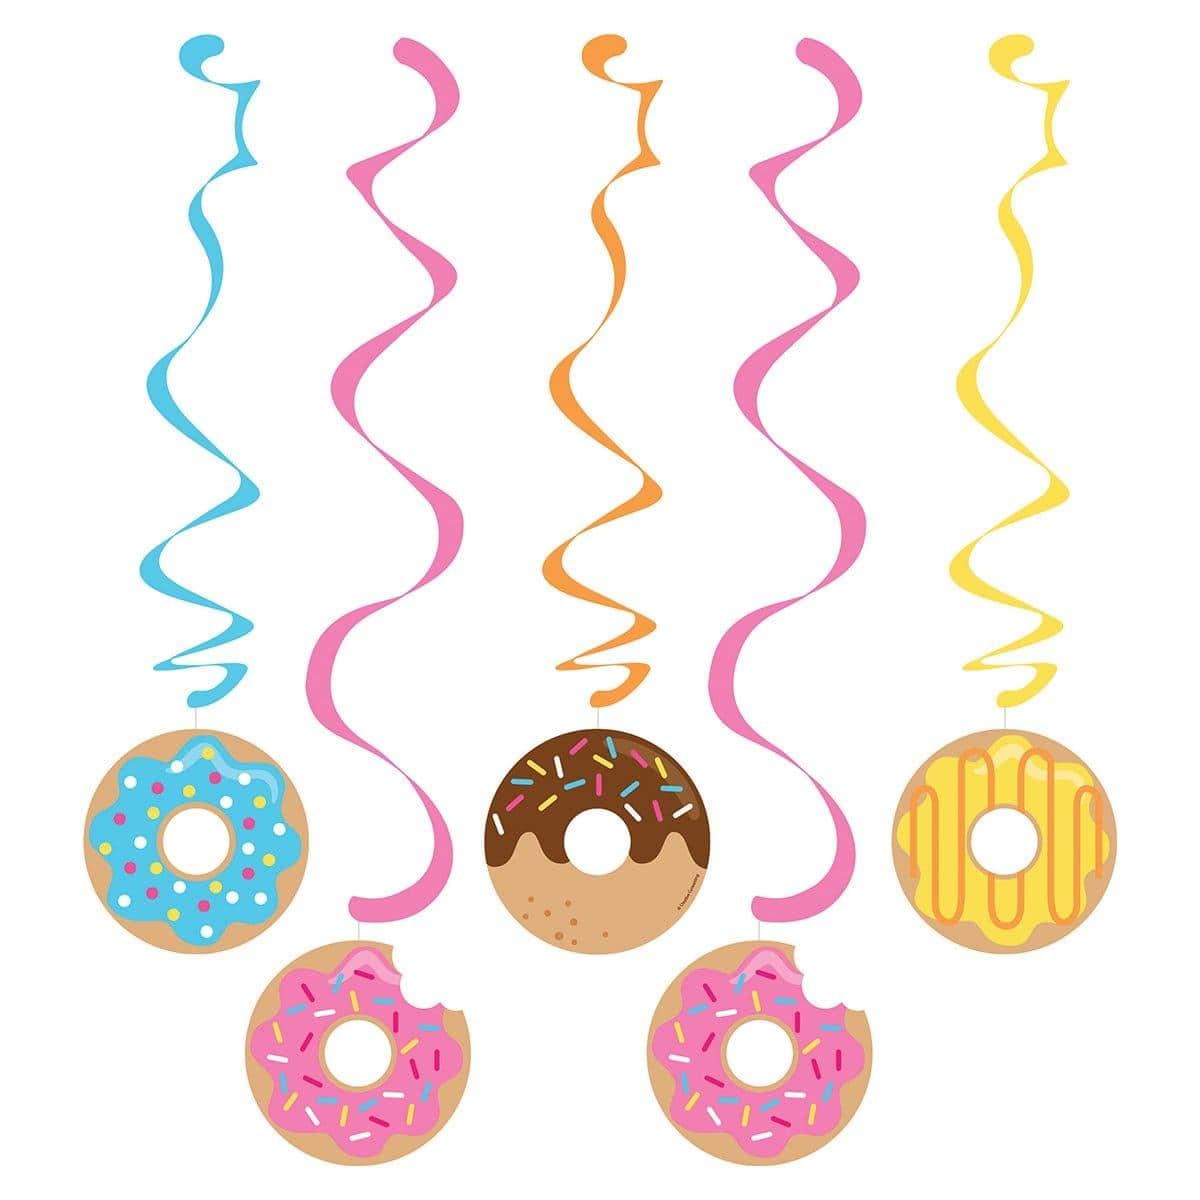 Buy Kids Birthday Donut Time swirl decorations, 5 per package sold at Party Expert